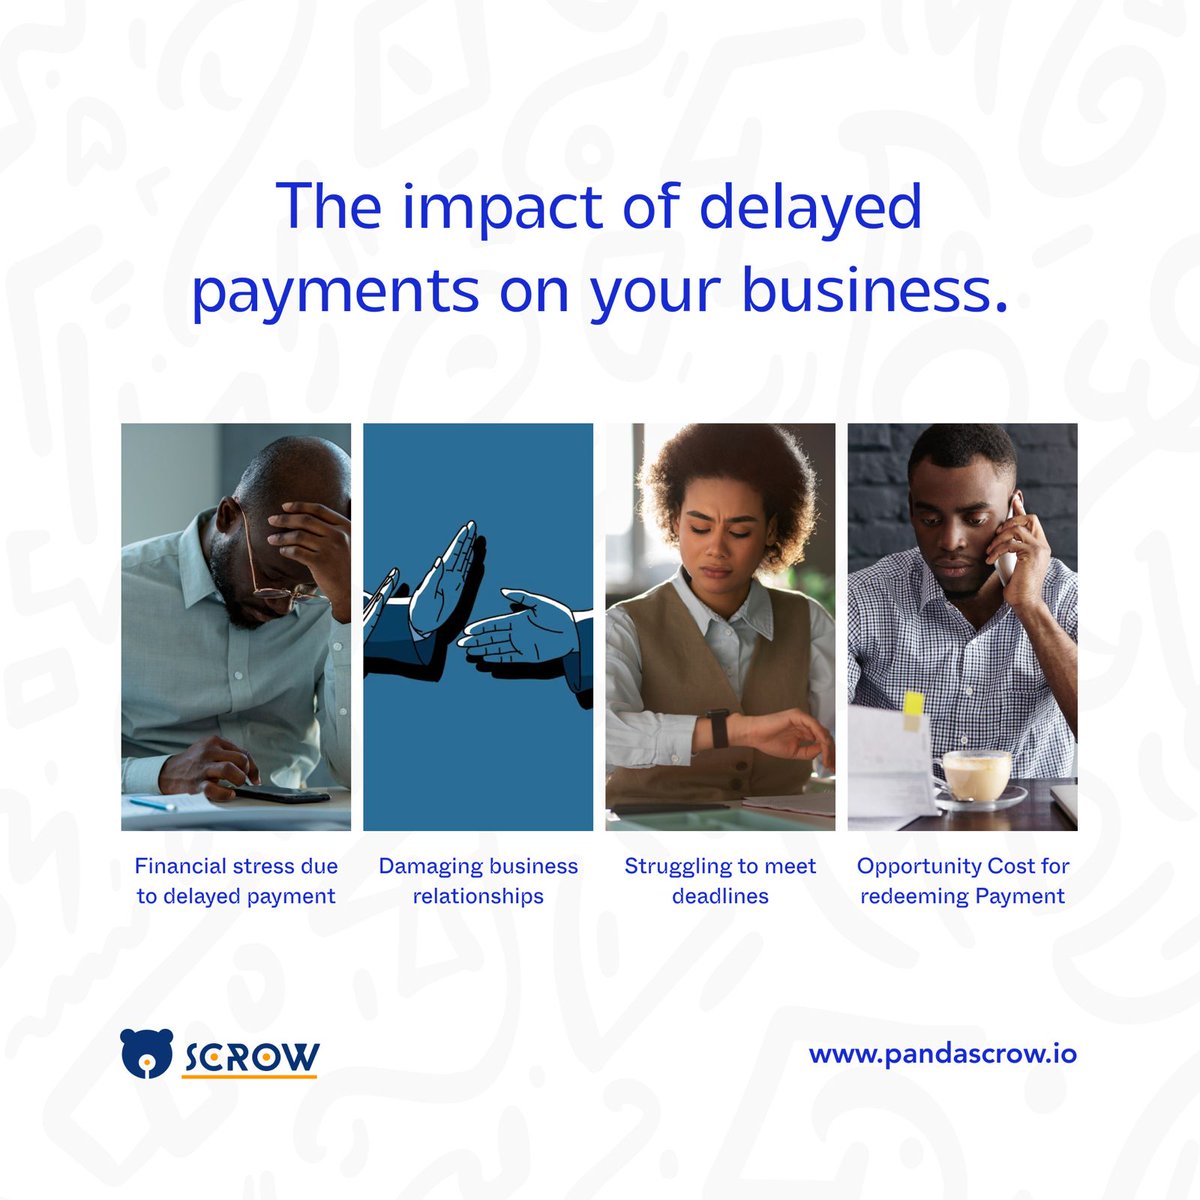 Late payments can hurt businesses. Share your experiences and insights on dealing with delayed payments. Let's support each other
.
.
.
.
! #LatePayments #BusinessChallenges #PandascrowEngagement #SimplifyPayments #UserExperience #Pandascrow
#escrow #internetscam #scam